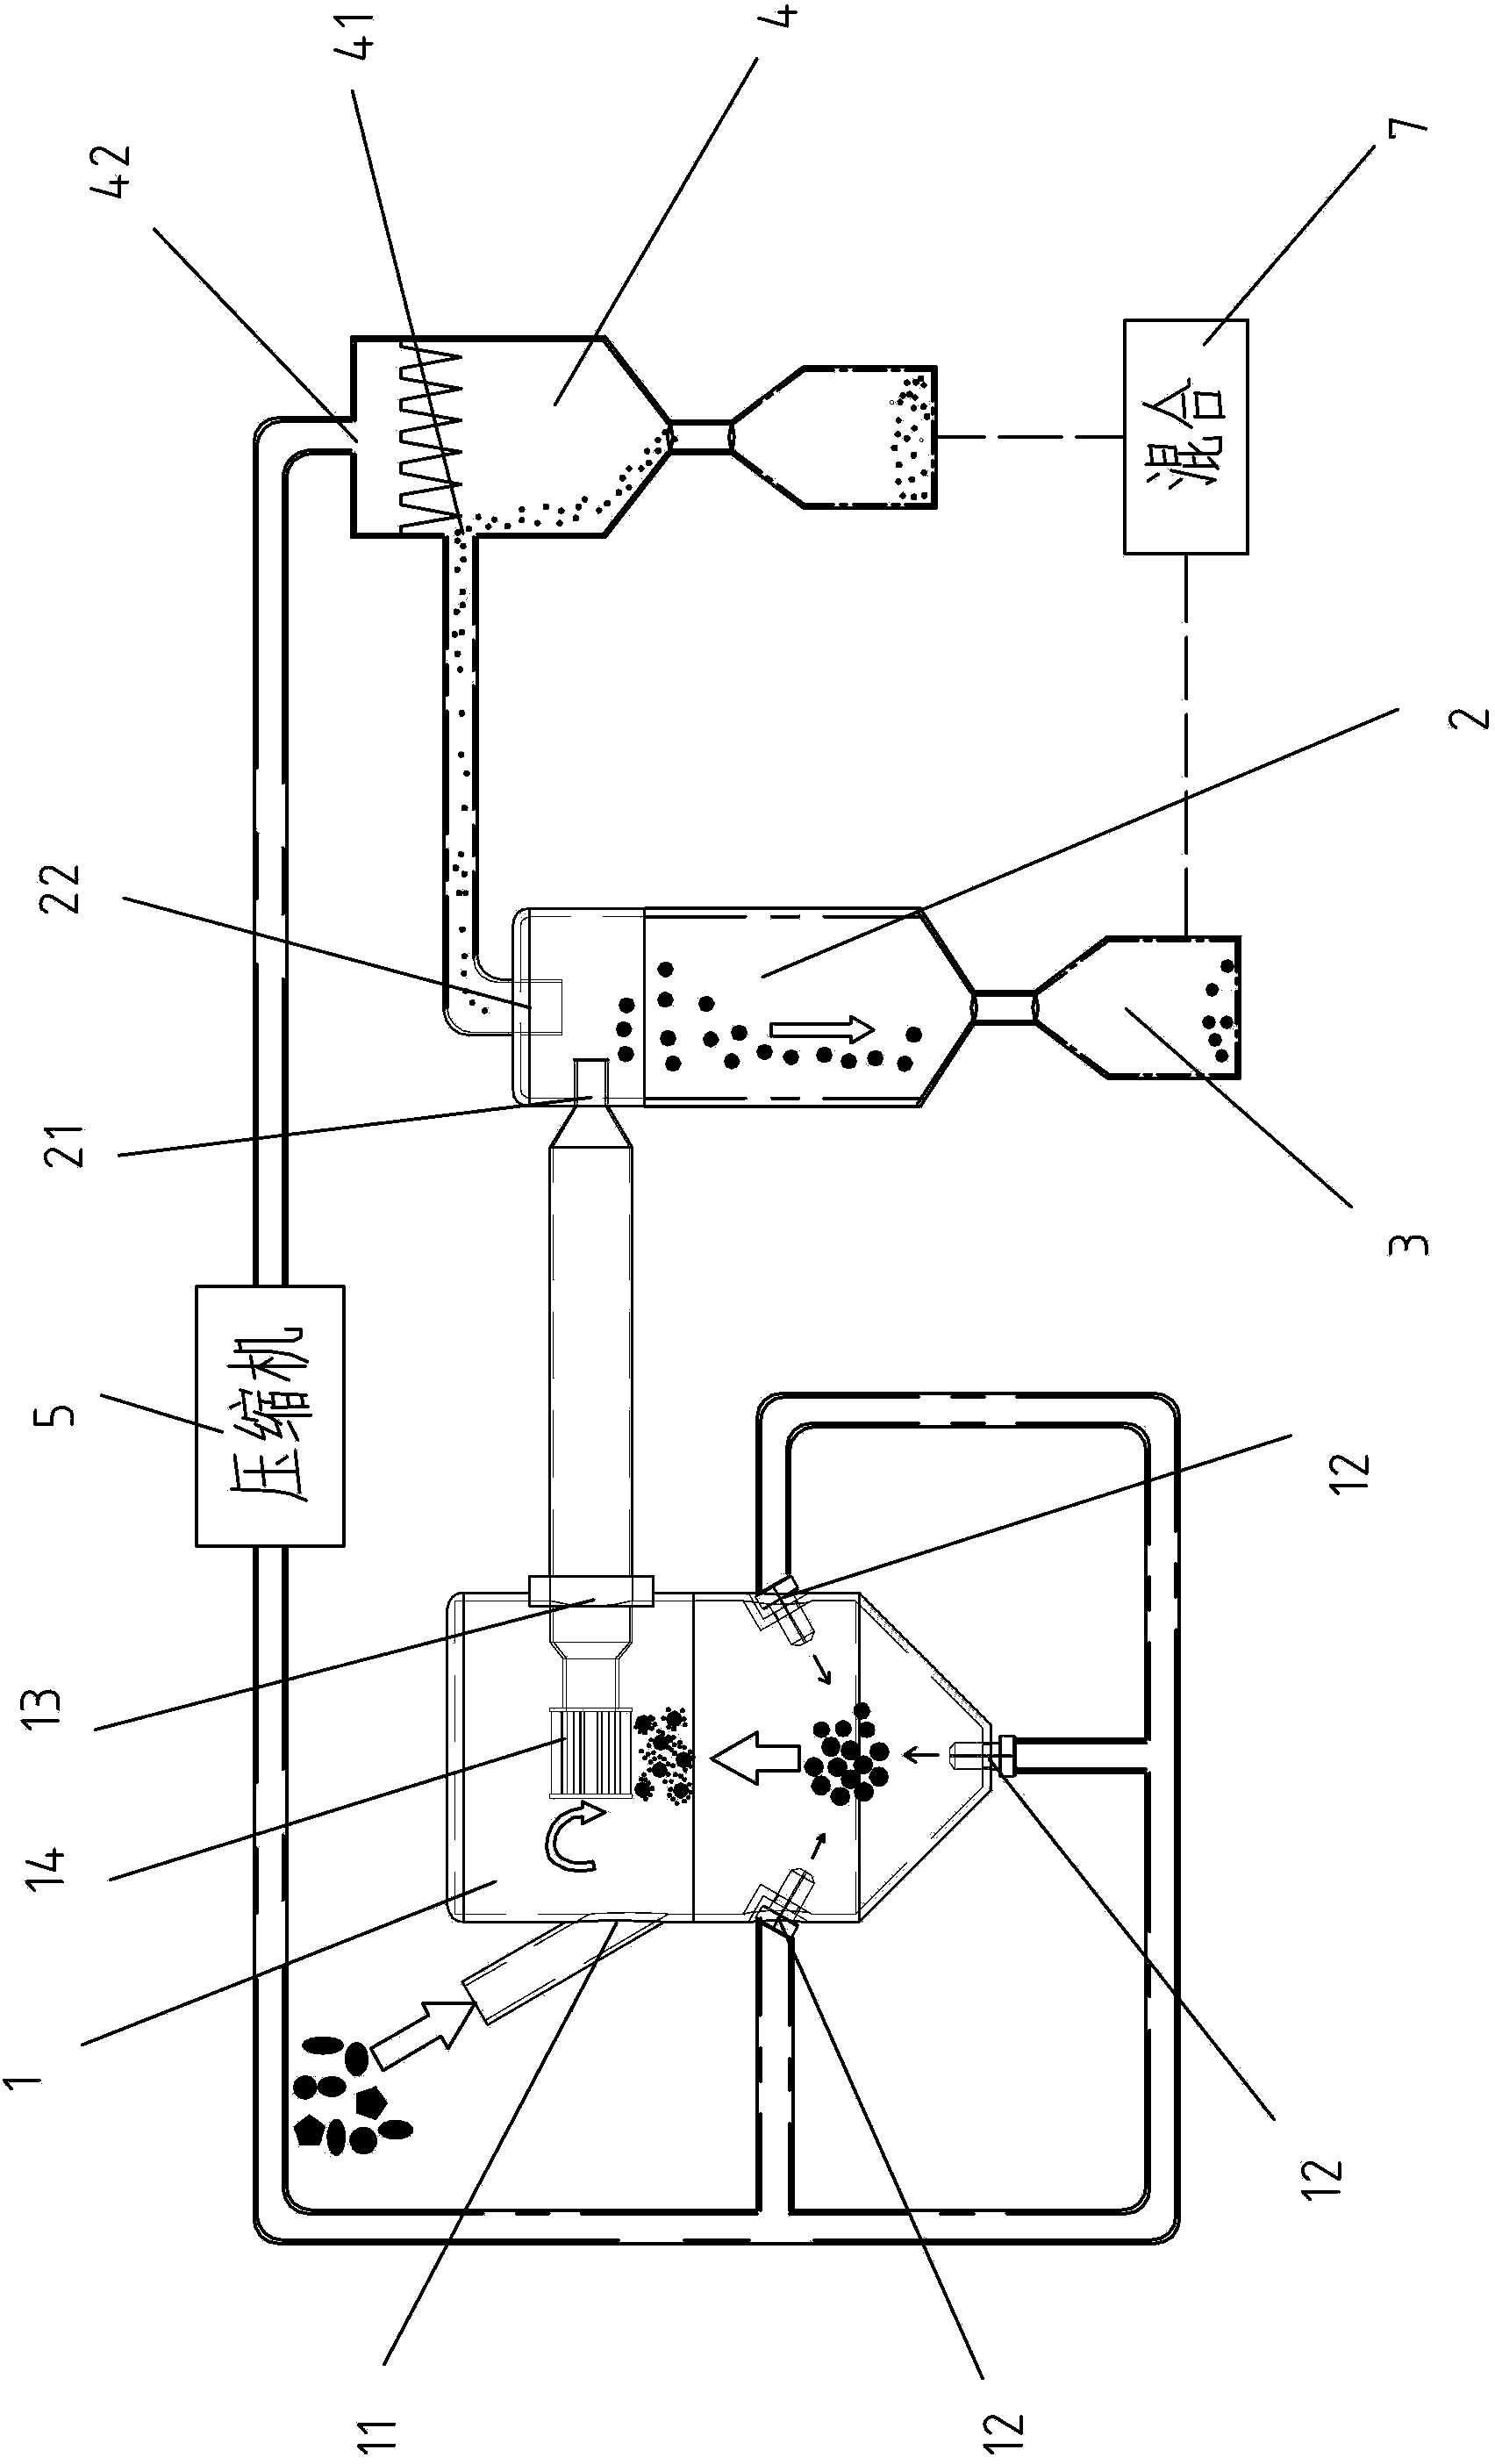 Sintered Nd-Fe-B magnet manufacturing method and device